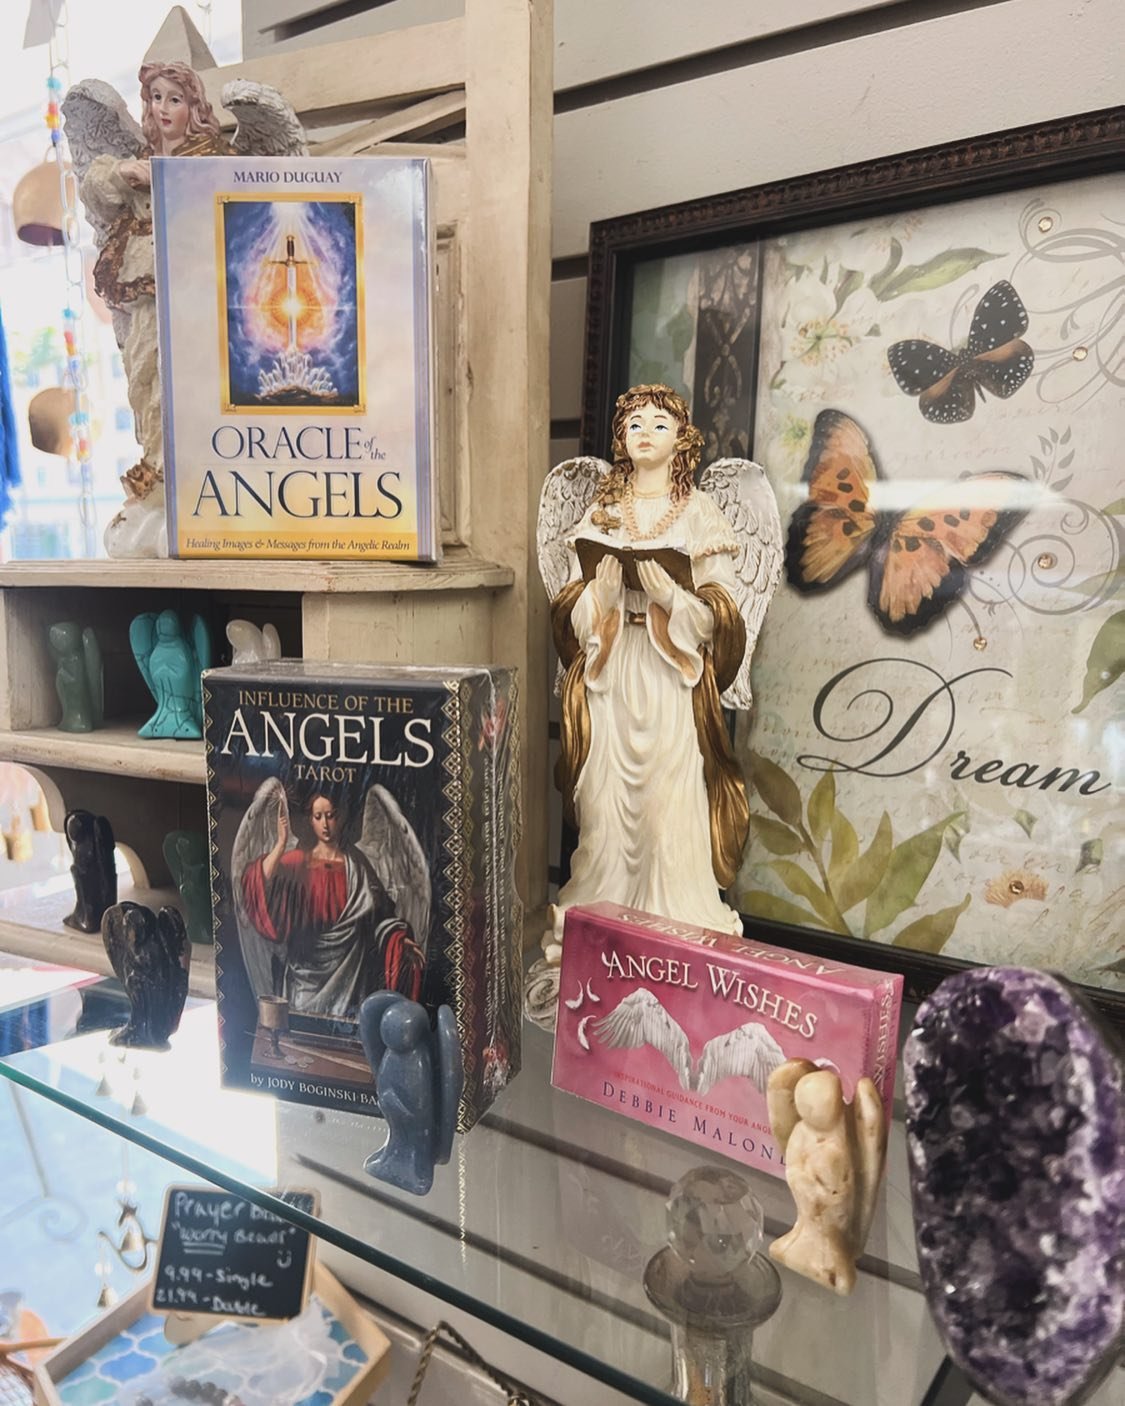 When you are in alignment, everything happens with the speed of angel&rsquo;s wings. 🕊️✨Terrie Marie

*

*

#oceanside #oceanside #osideornoside #angelsareeverywhere #osidelocal